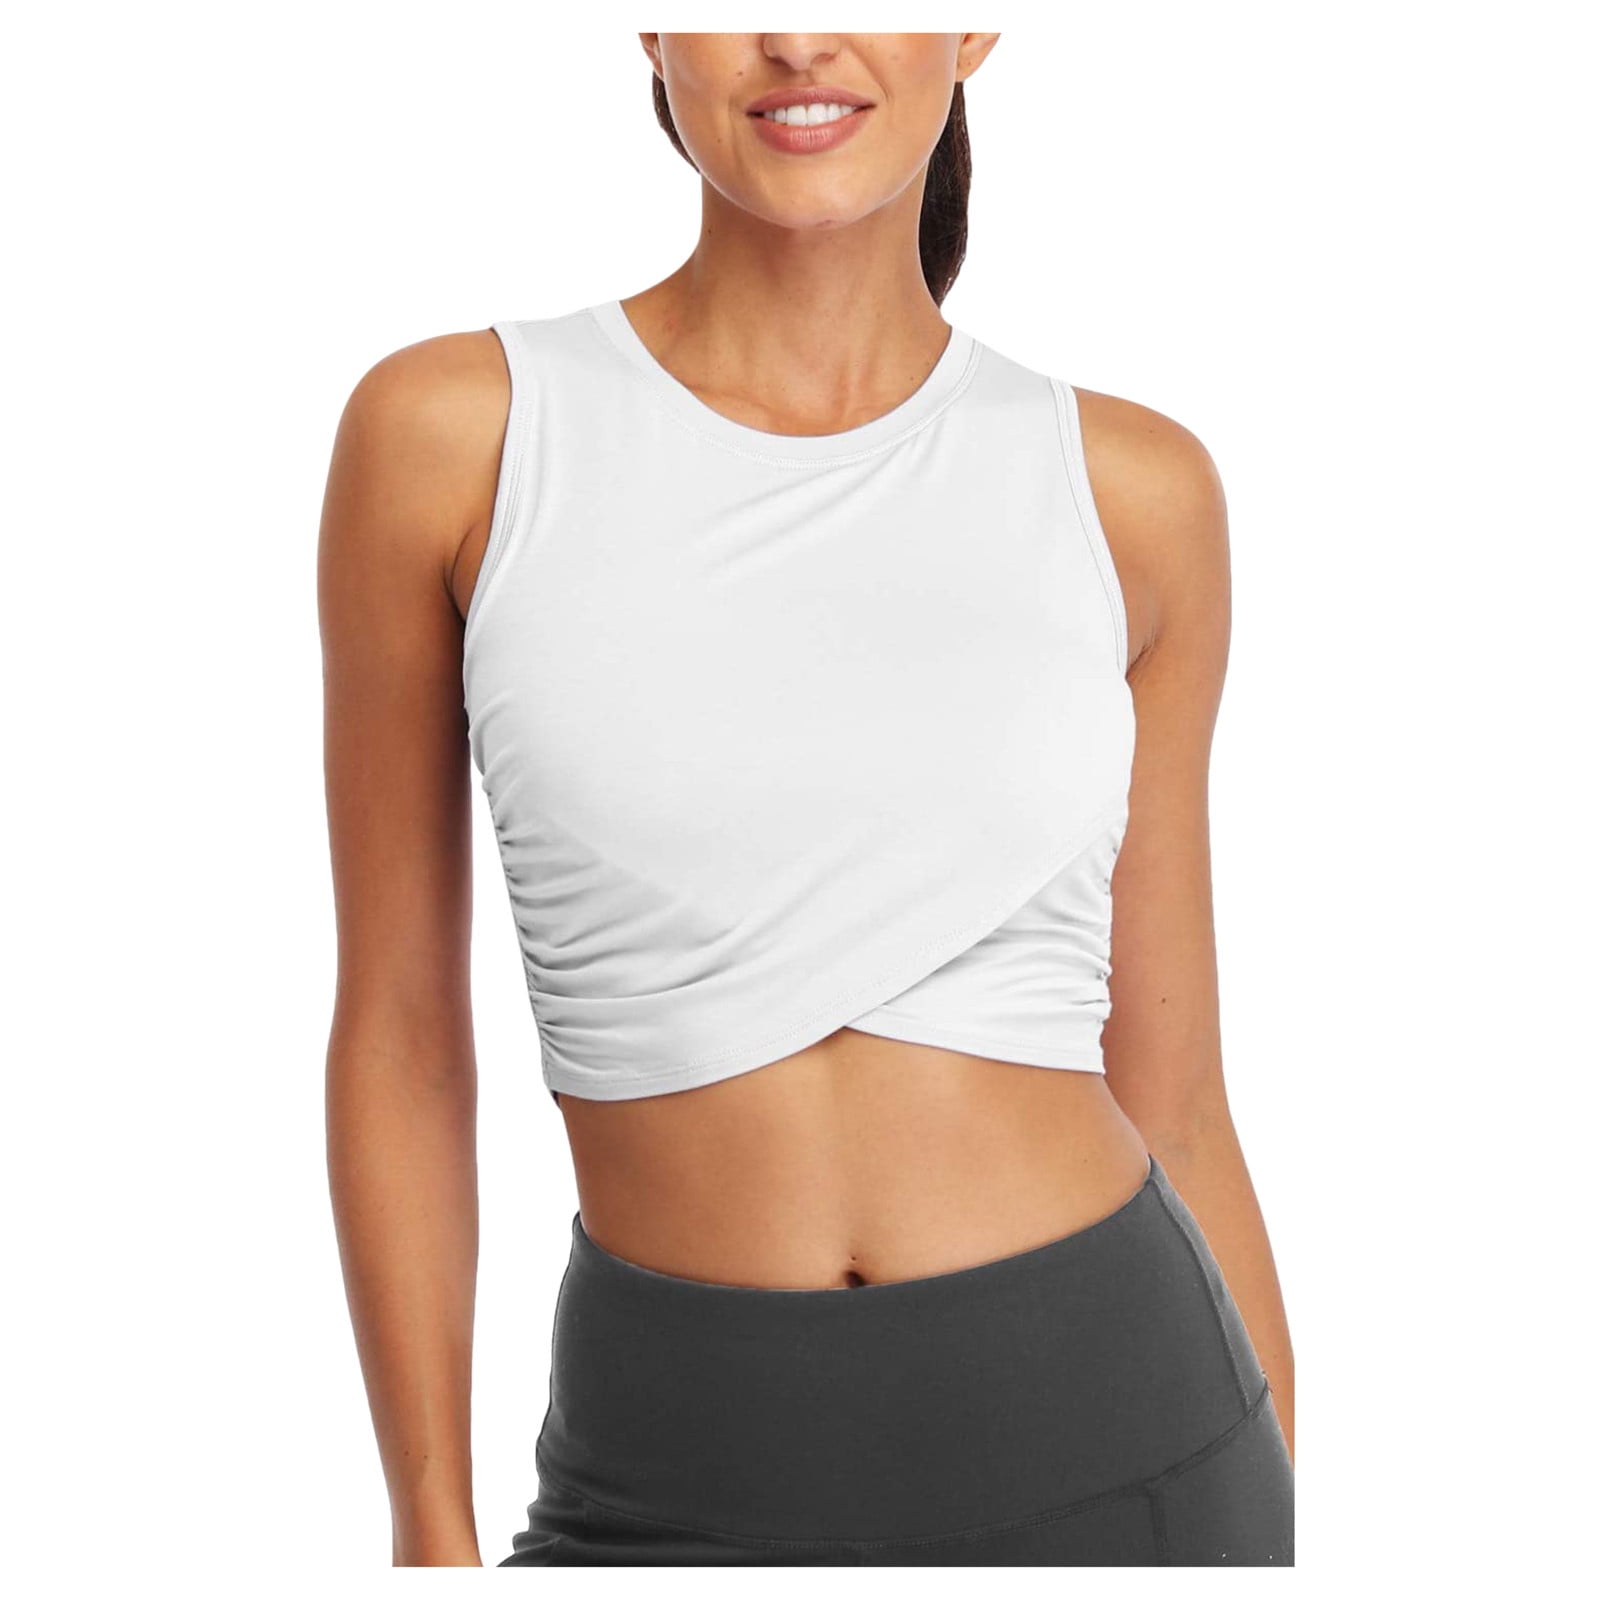 Sanutch Womens Workout Crop Tops Yoga Shirts Exercise Muscle Tank Tops 